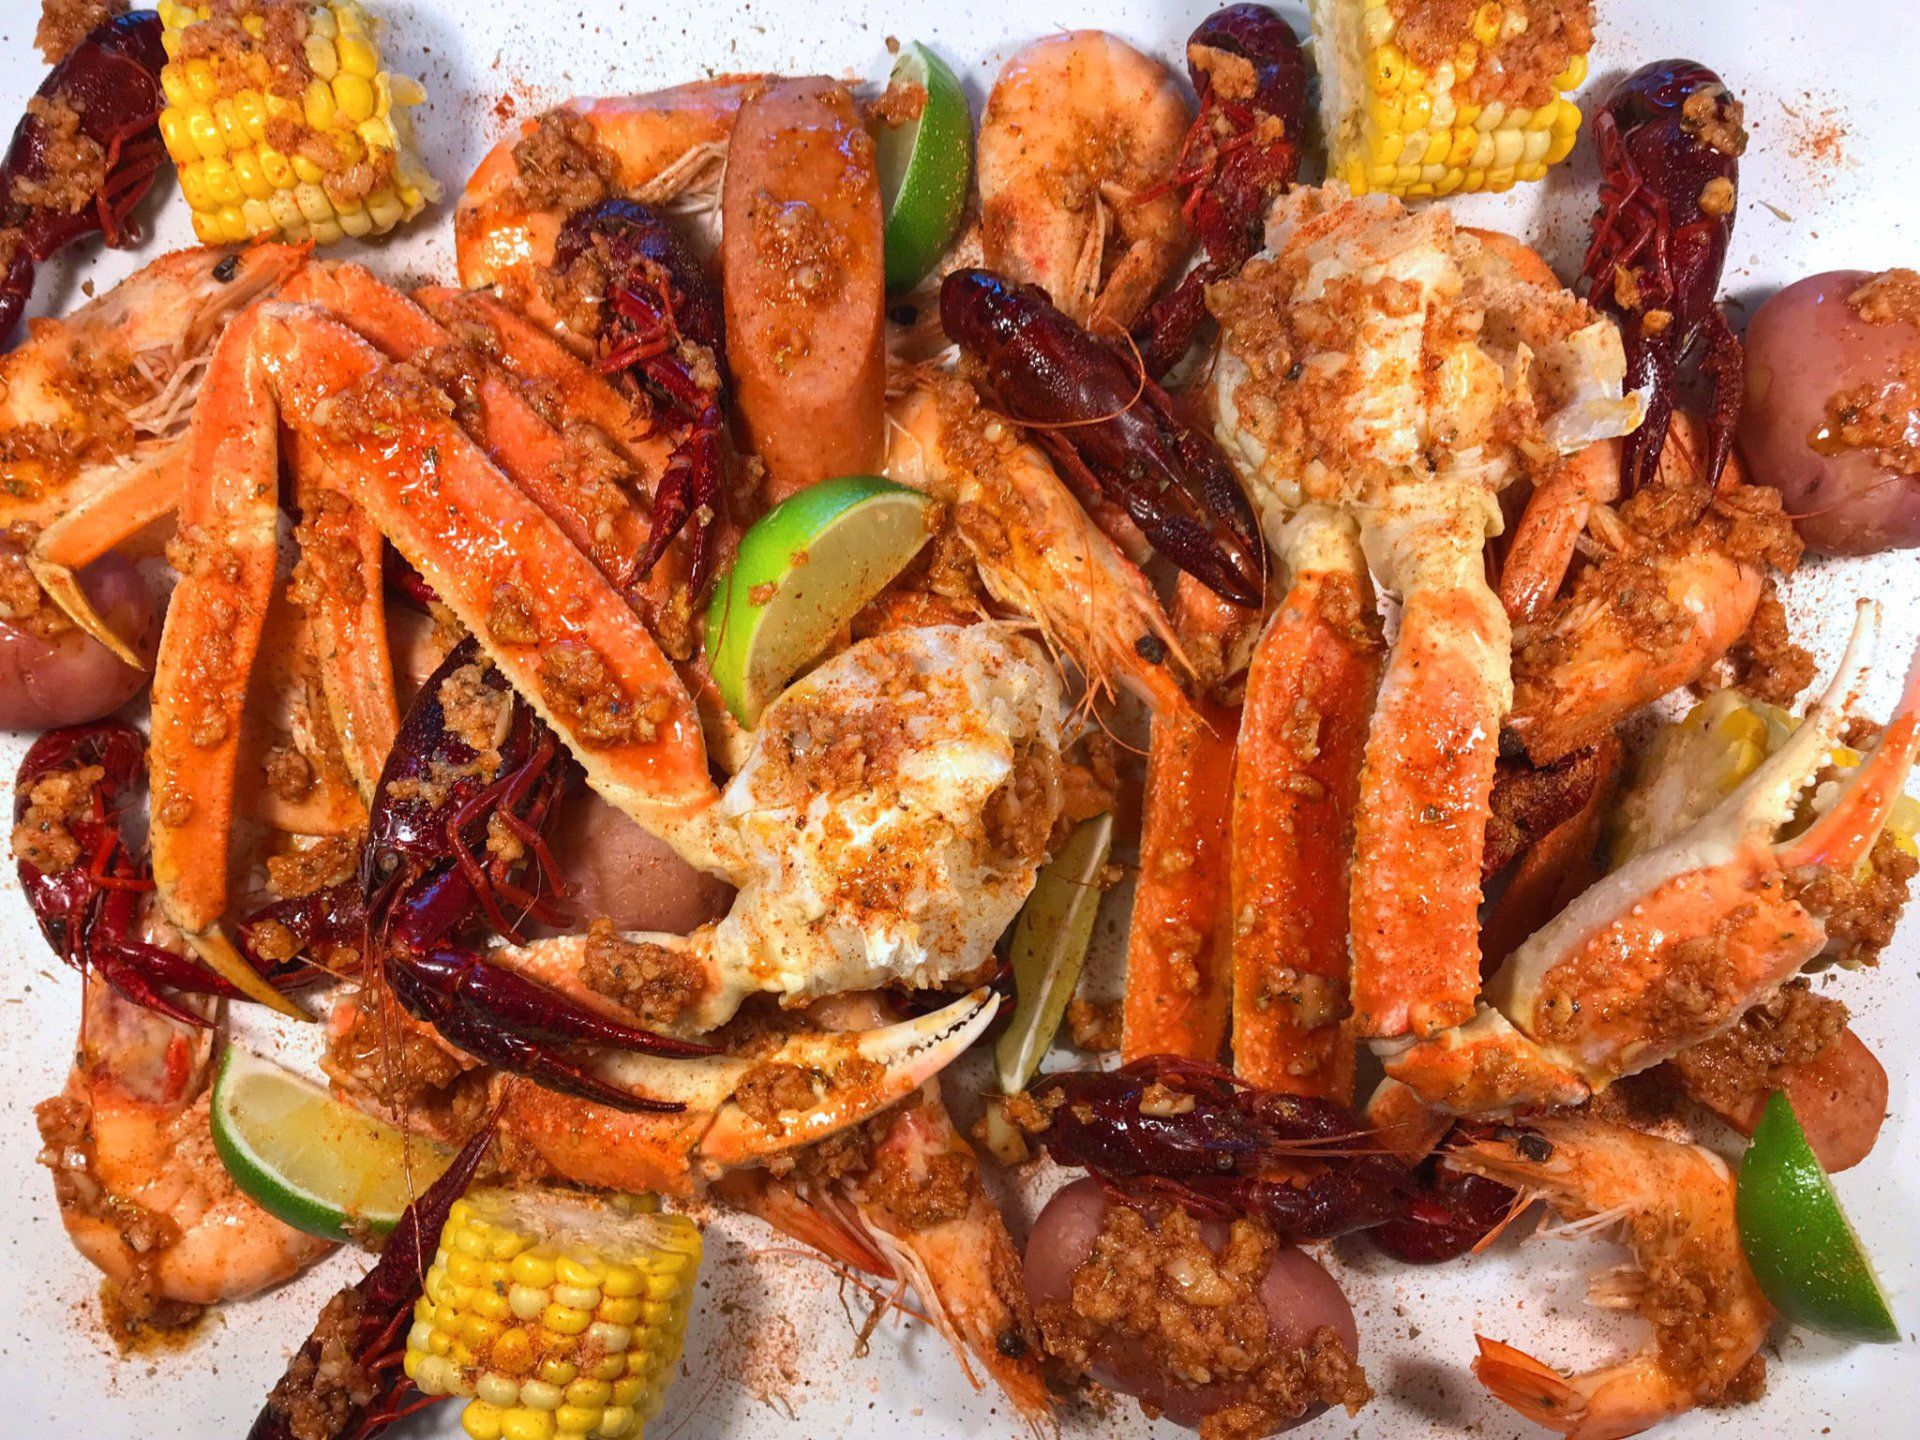 Best Fried Chicken, Fried Fish and Cajun Seafood Boil in town